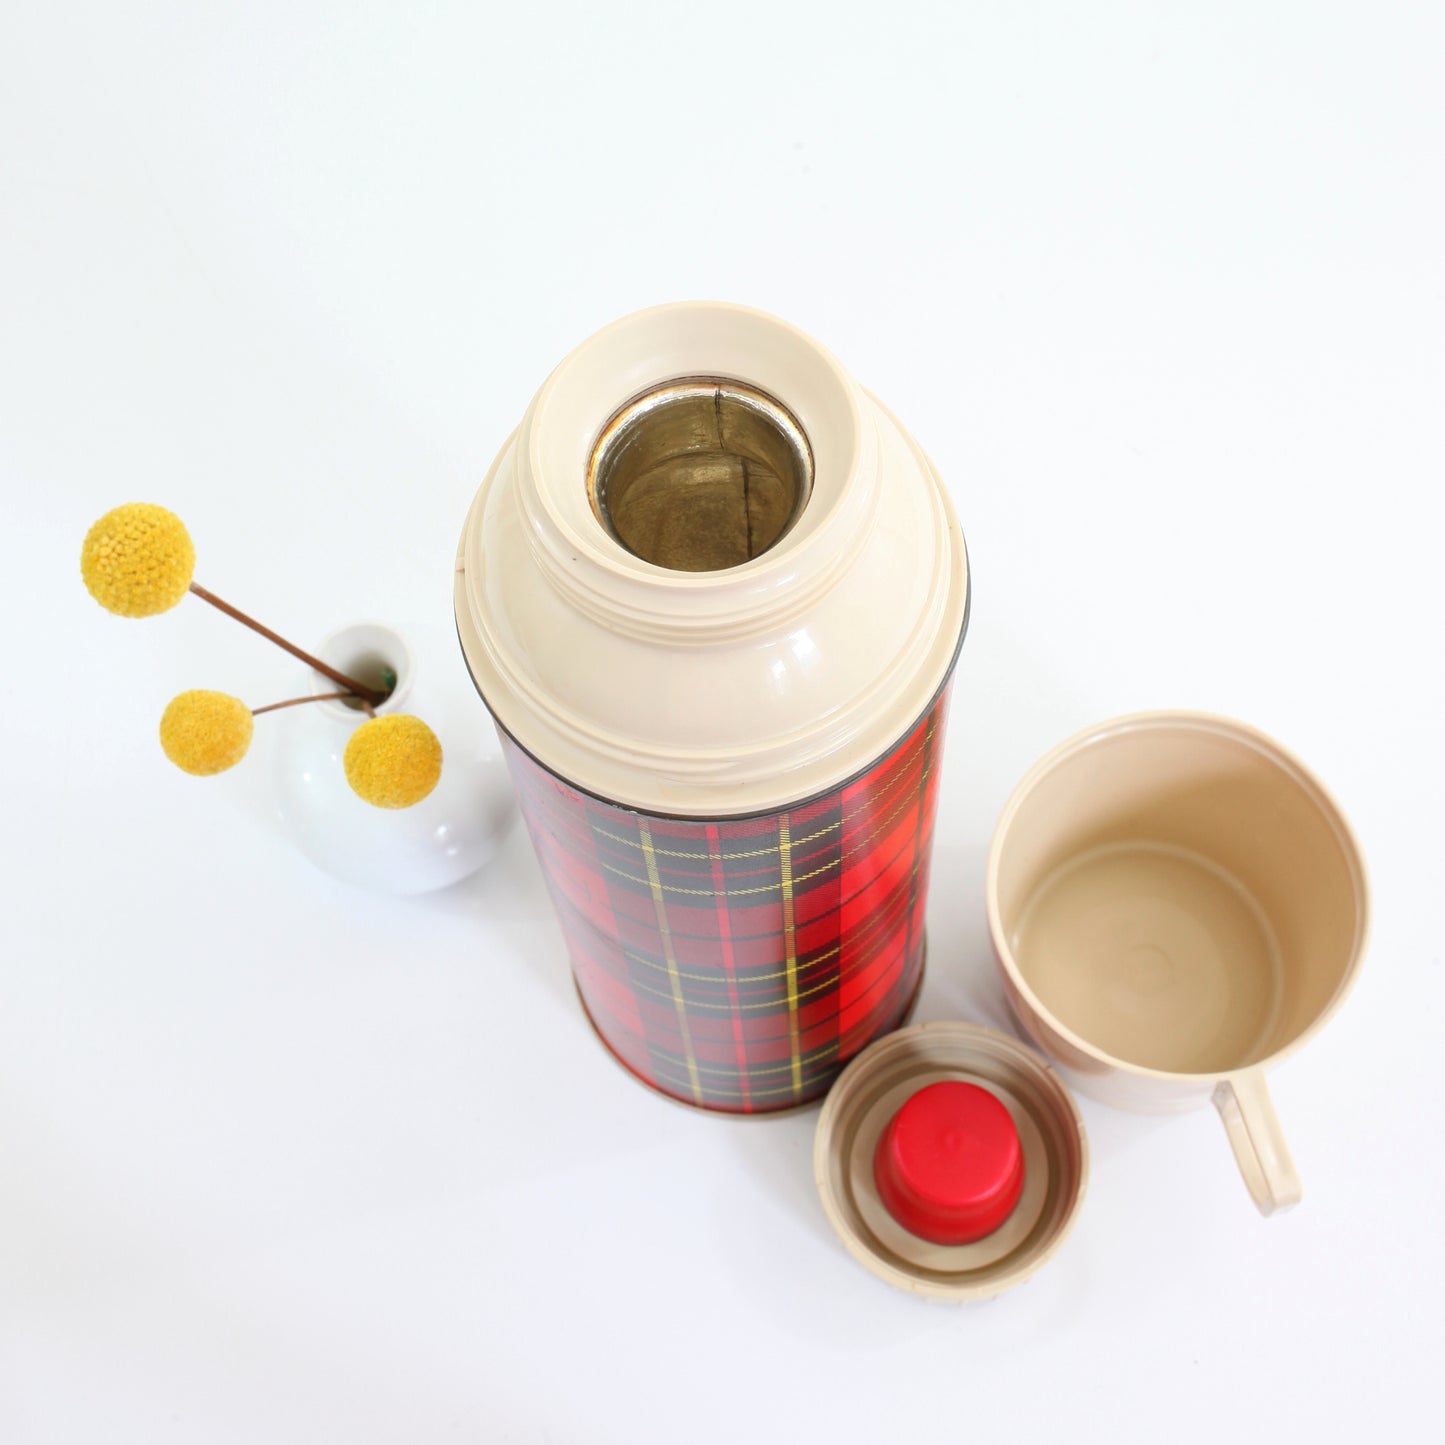 SOLD - Vintage Red Plaid Thermos / Pint Size